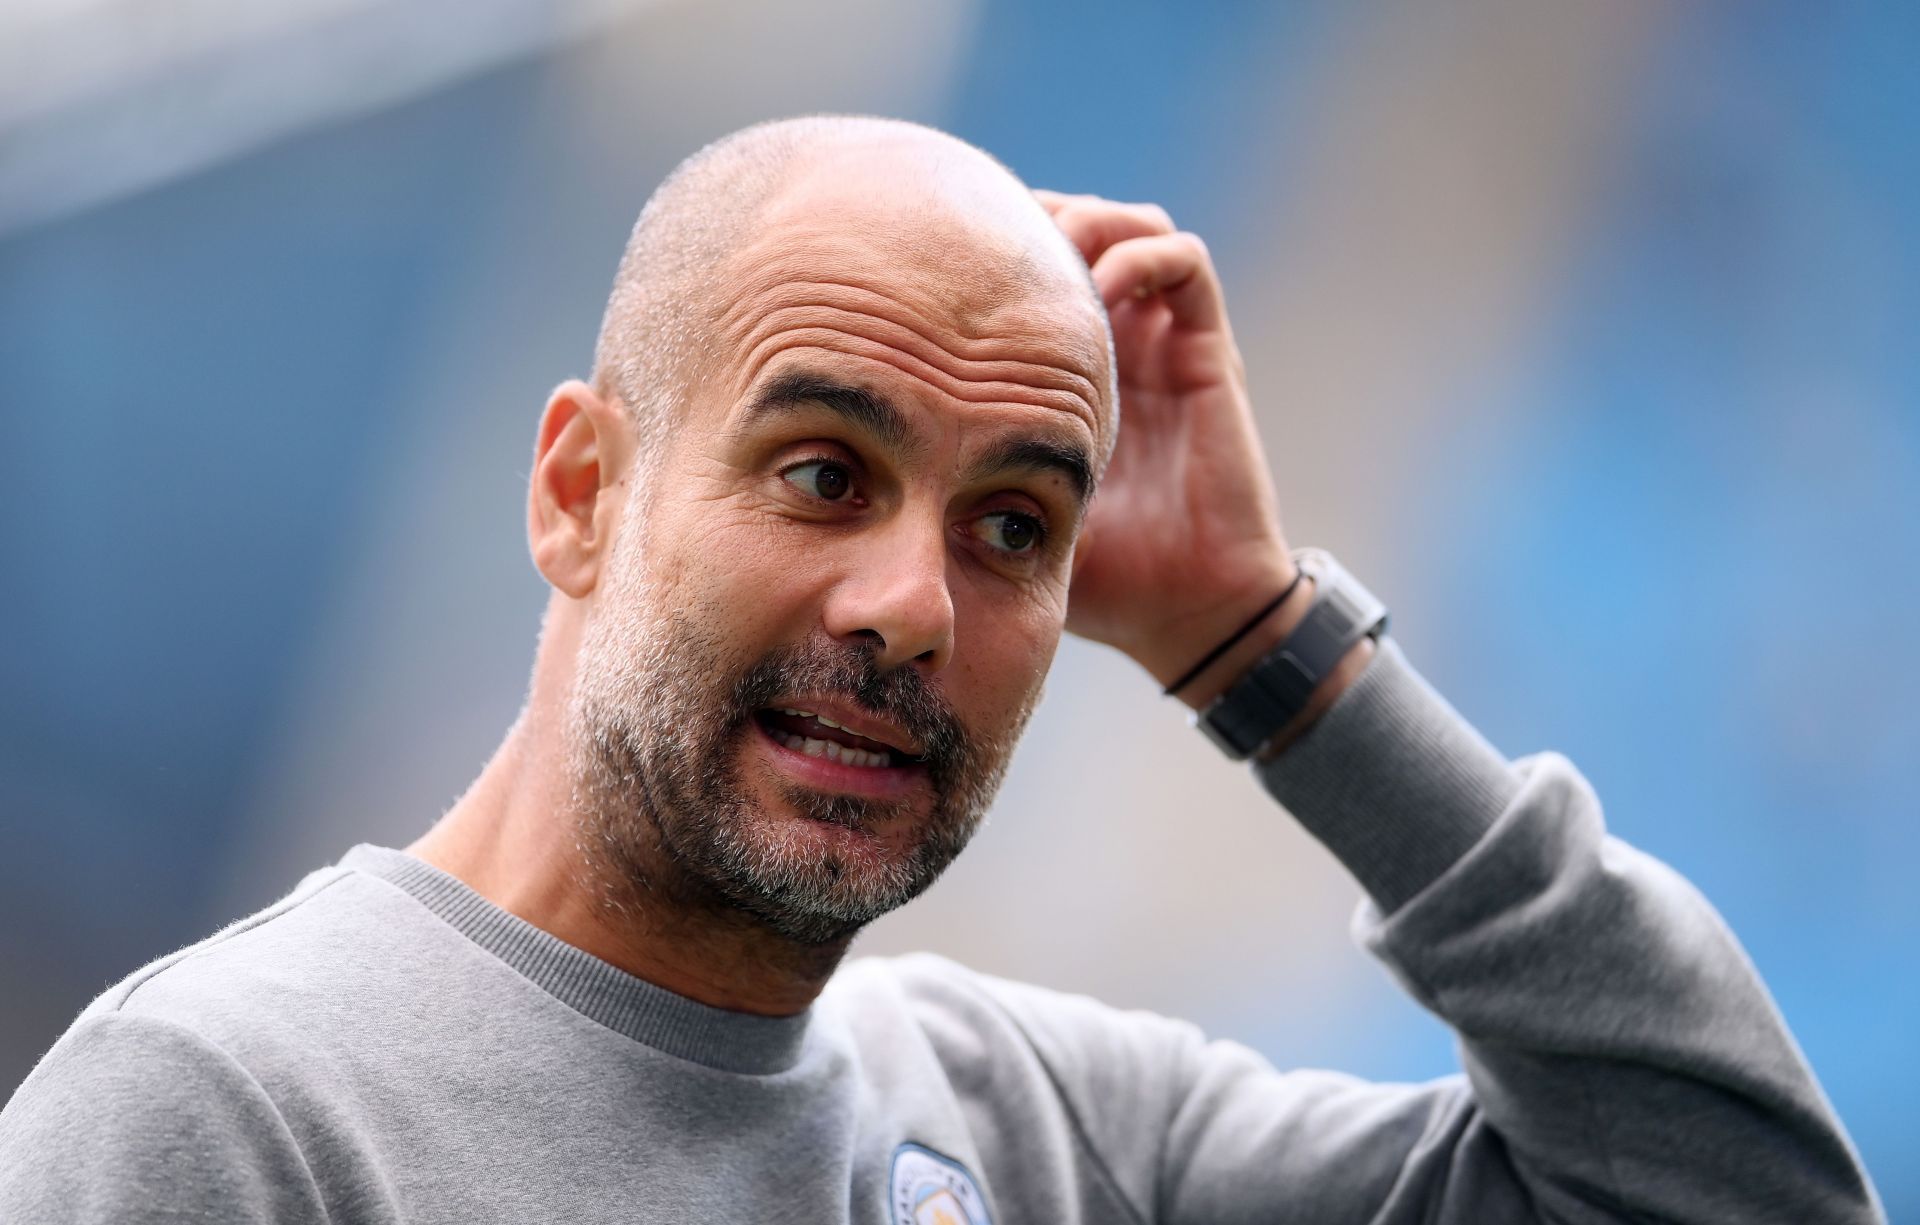 The Manchester City manager is showing no signs of slowing down